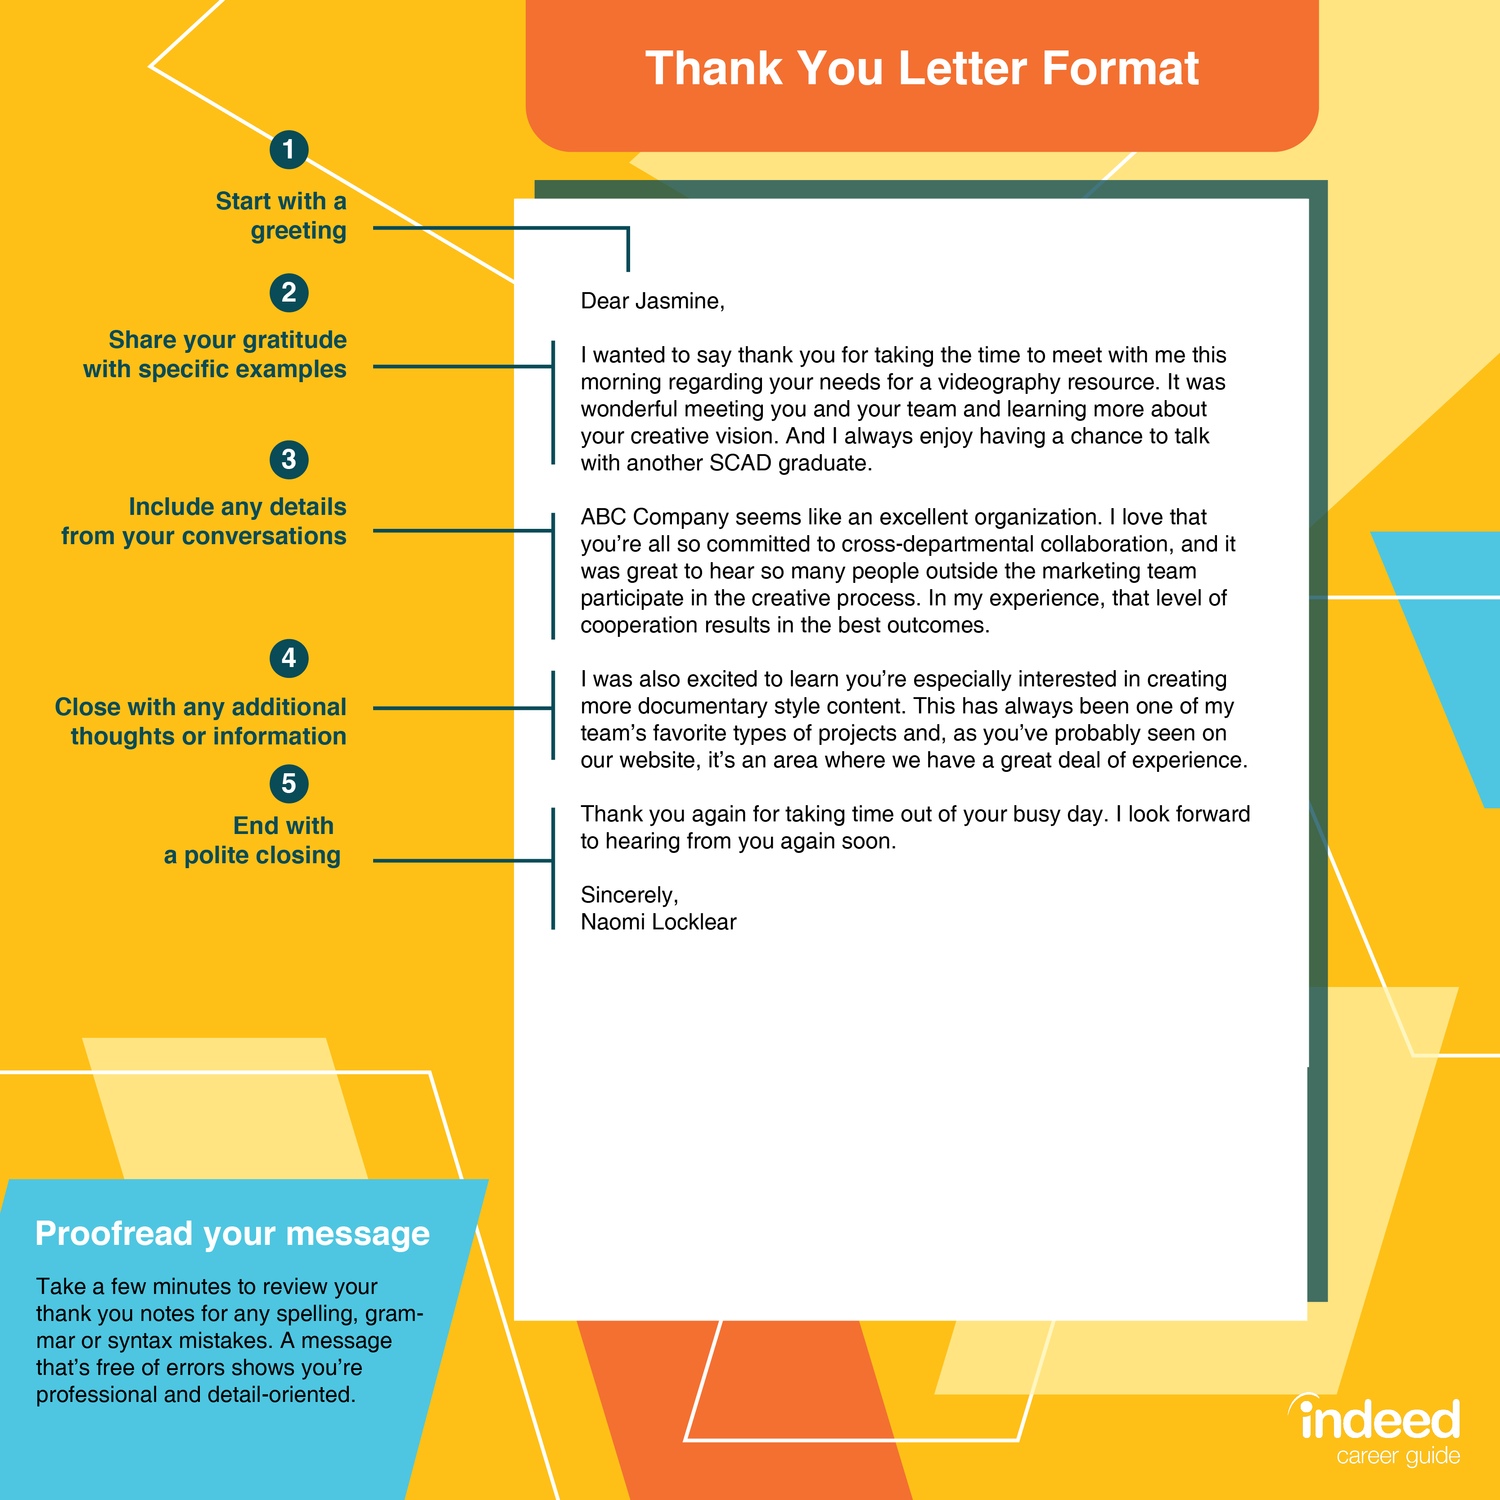 How To Write a Thank You Note for a Recommendation Letter  Indeed.com